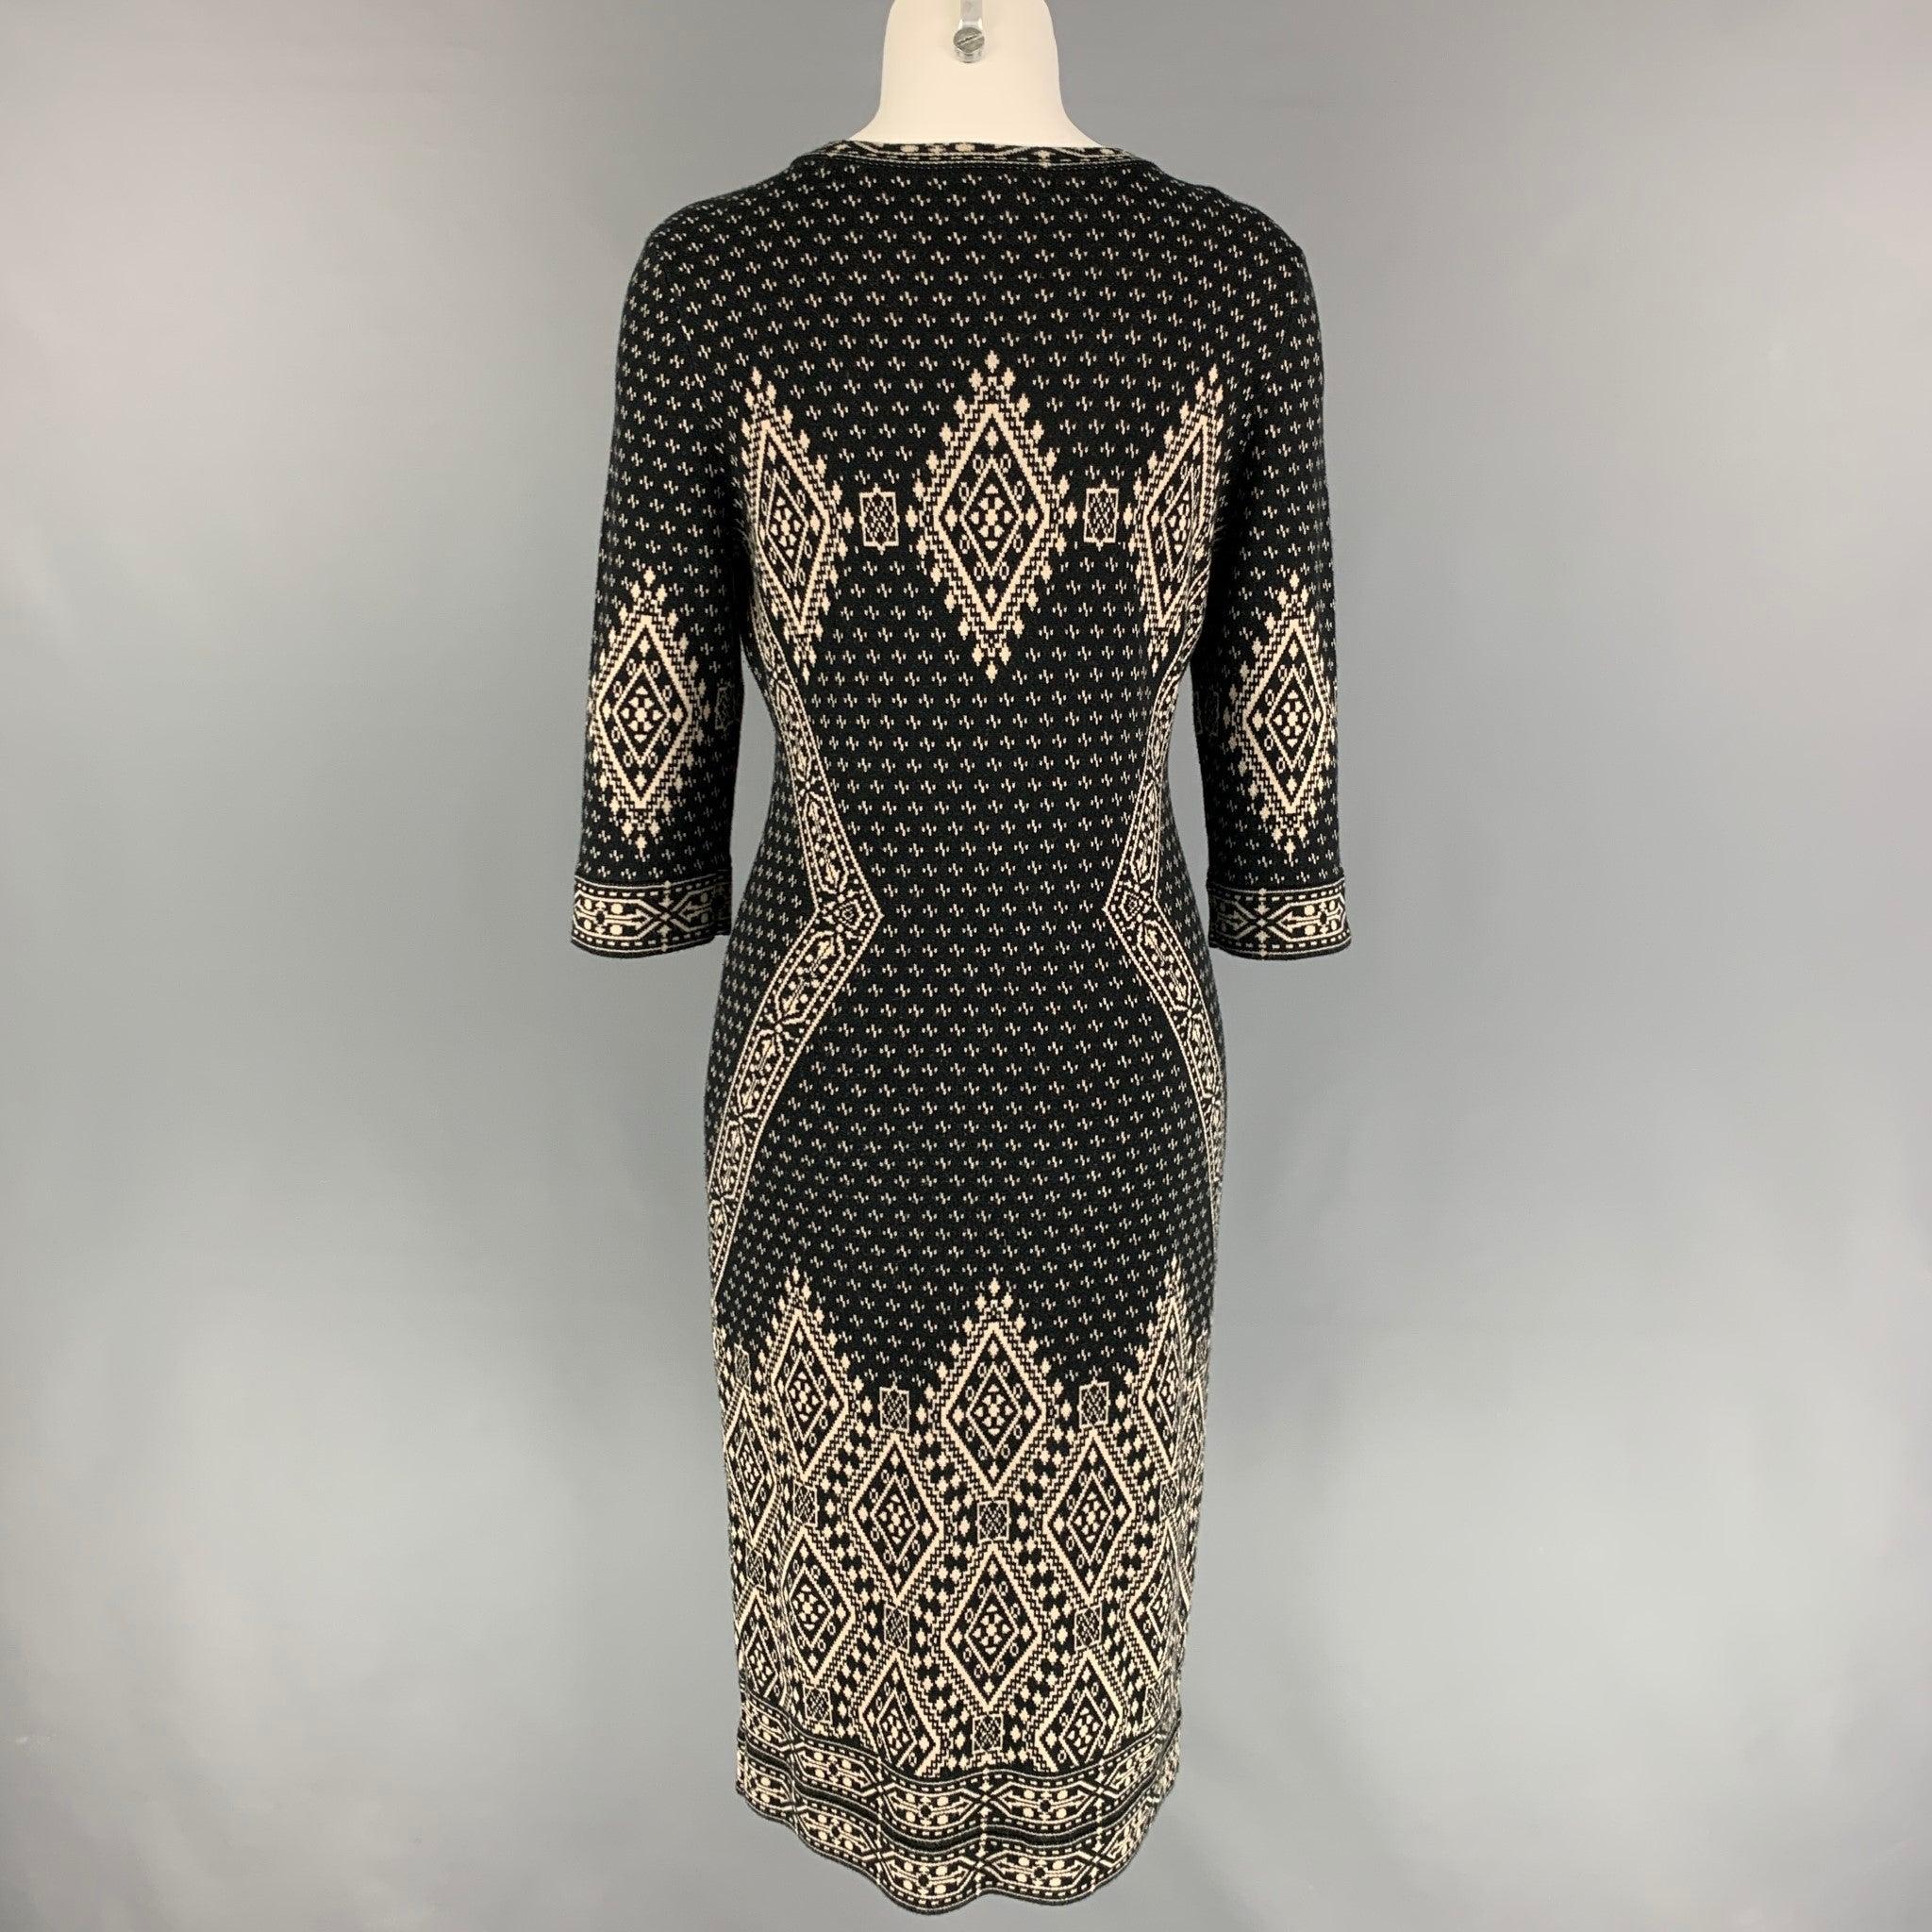 SAKS FIFTH AVENUE Size M Black White Cotton Blend 3/4 Sleeves Dress In Good Condition For Sale In San Francisco, CA